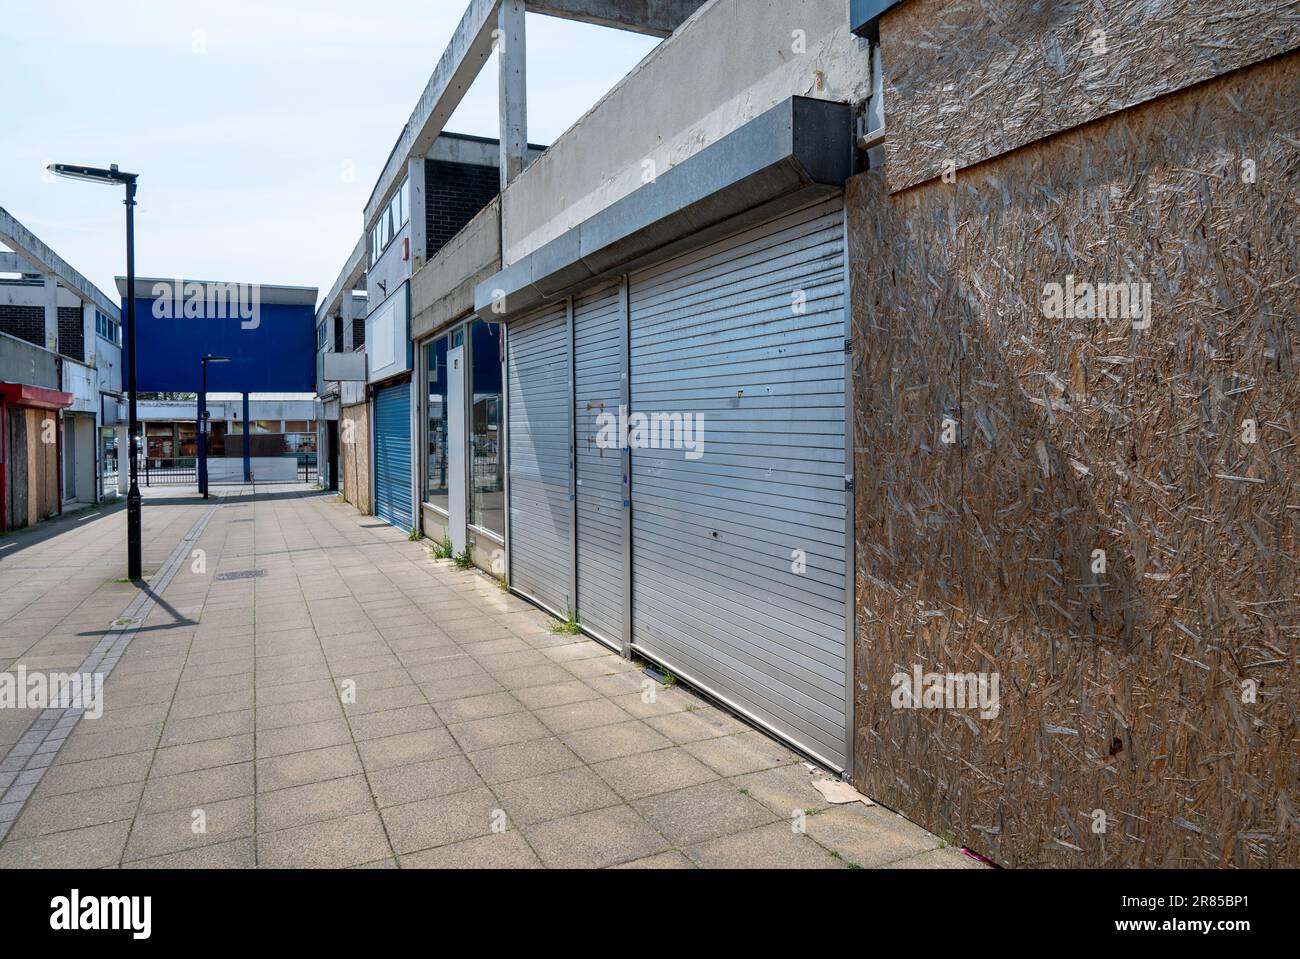 Run down and boarded up shopping precinct prior to being rejuvenated in an English town centre. Stock Photo